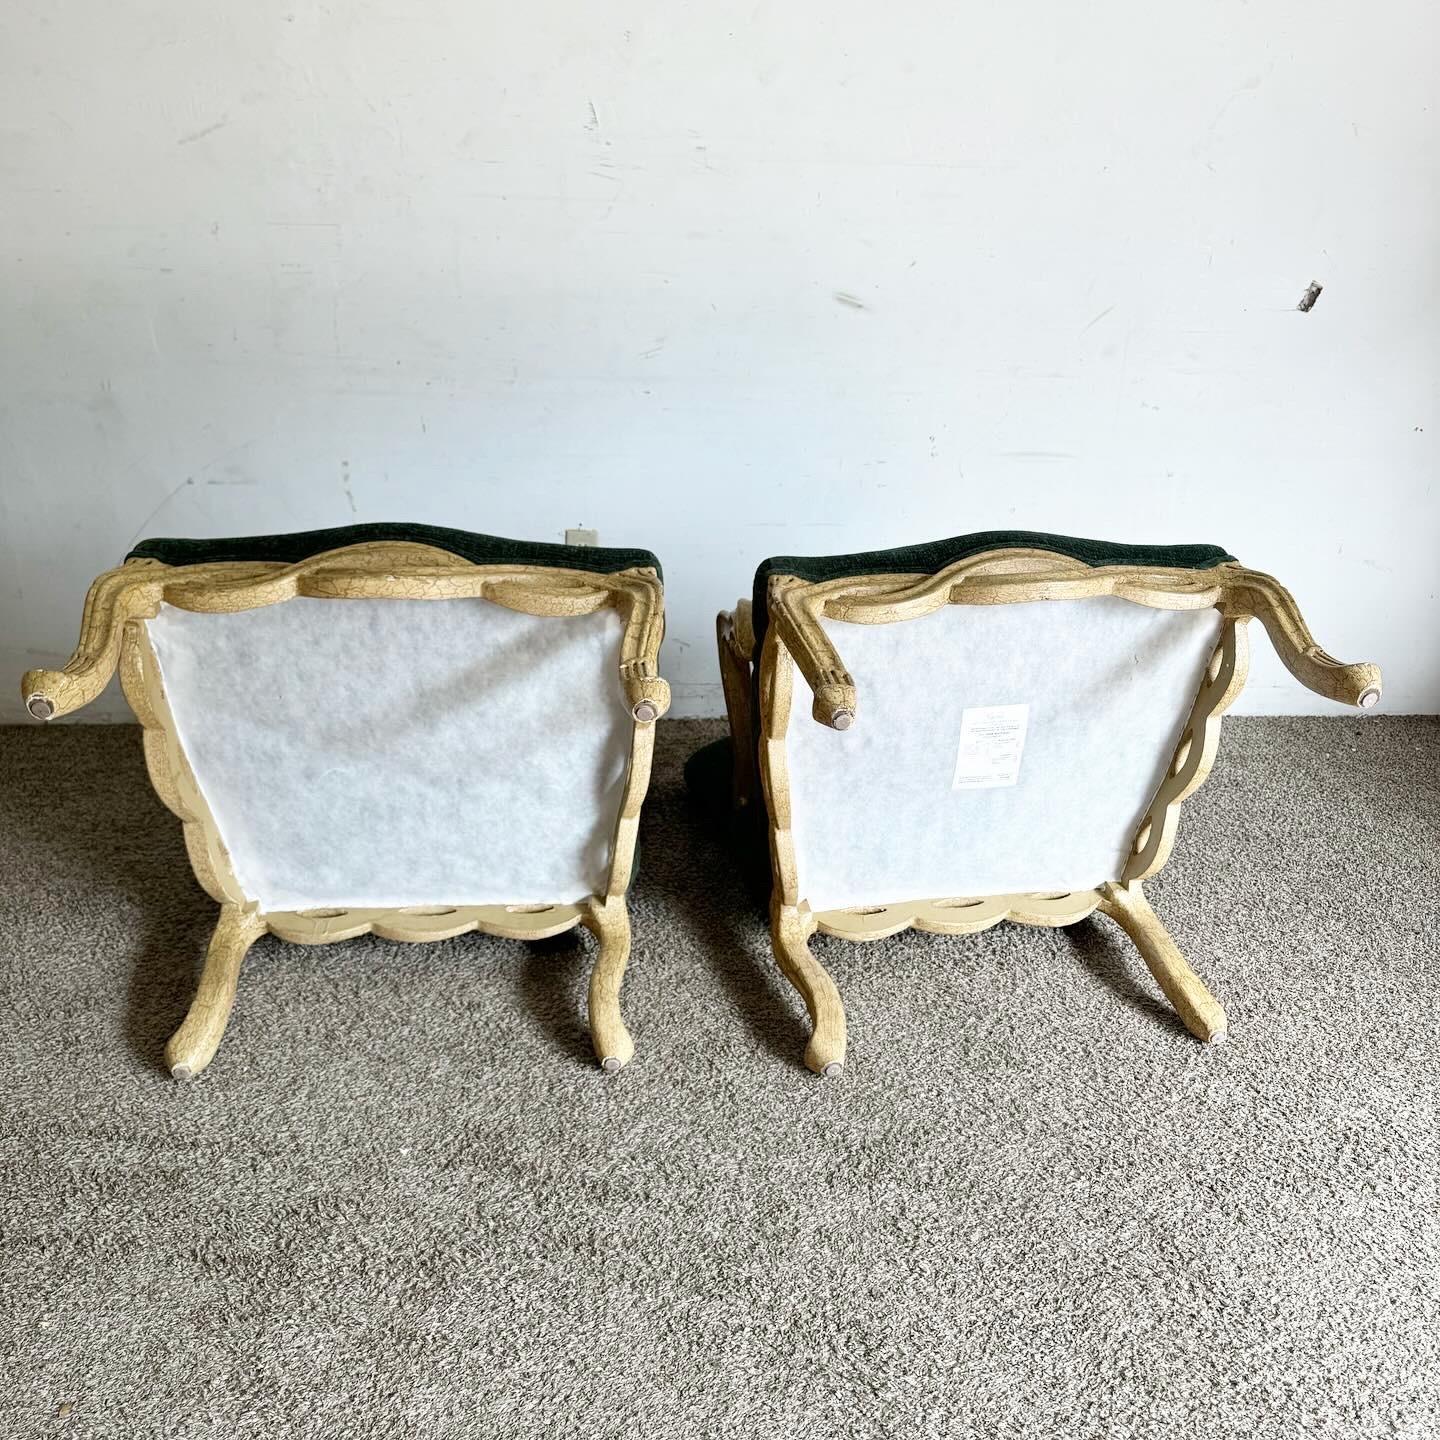 French Provincial Style Green Arm Chairs With Twisting Wooden Frame - a Pair For Sale 1